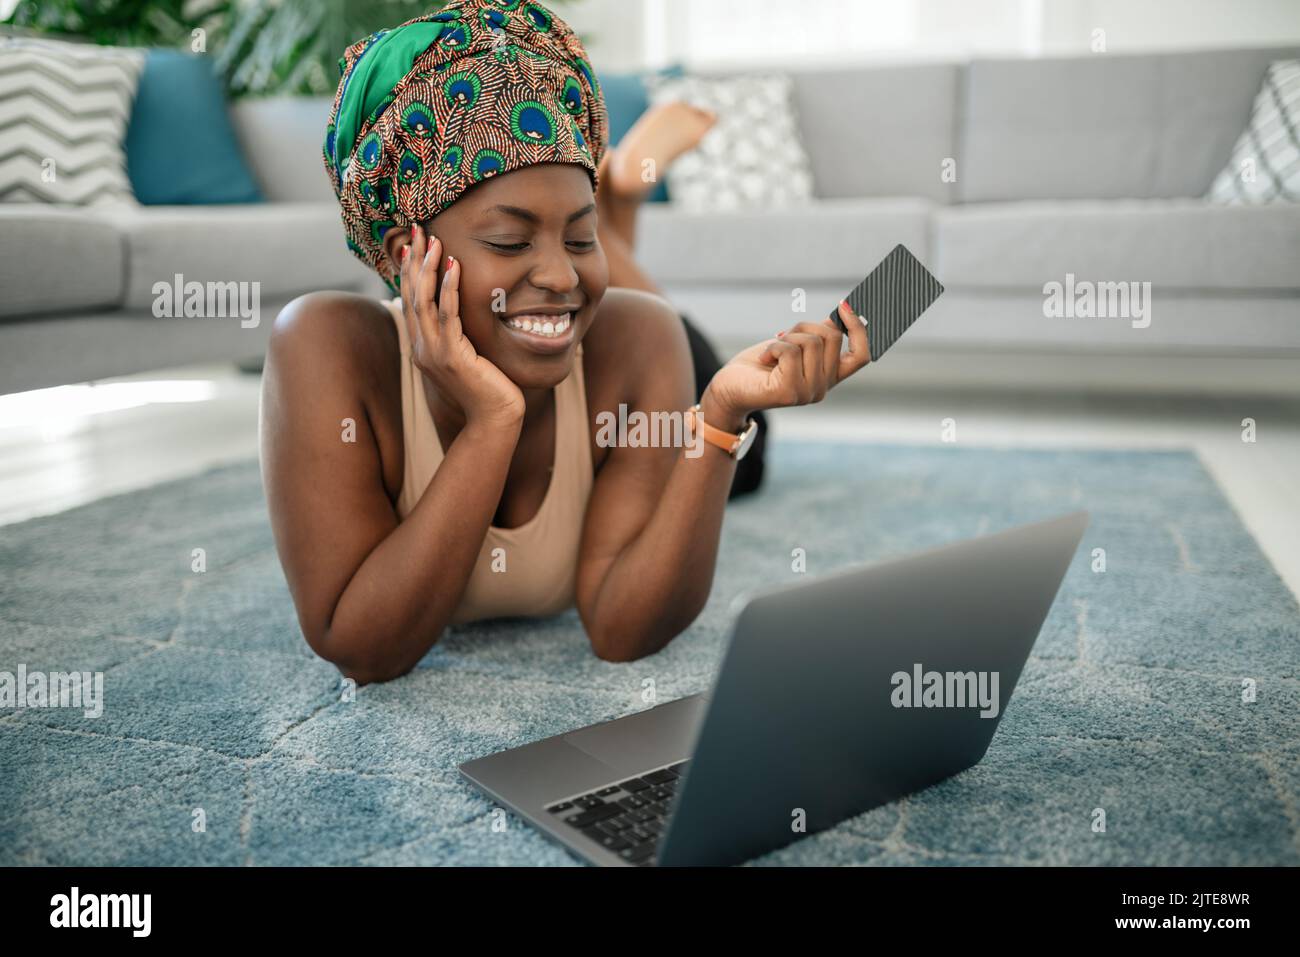 Black African woman wearing traditional headscarf, making online shopping purchase using laptop and credit card. Laying on rug in lounge at home Stock Photo